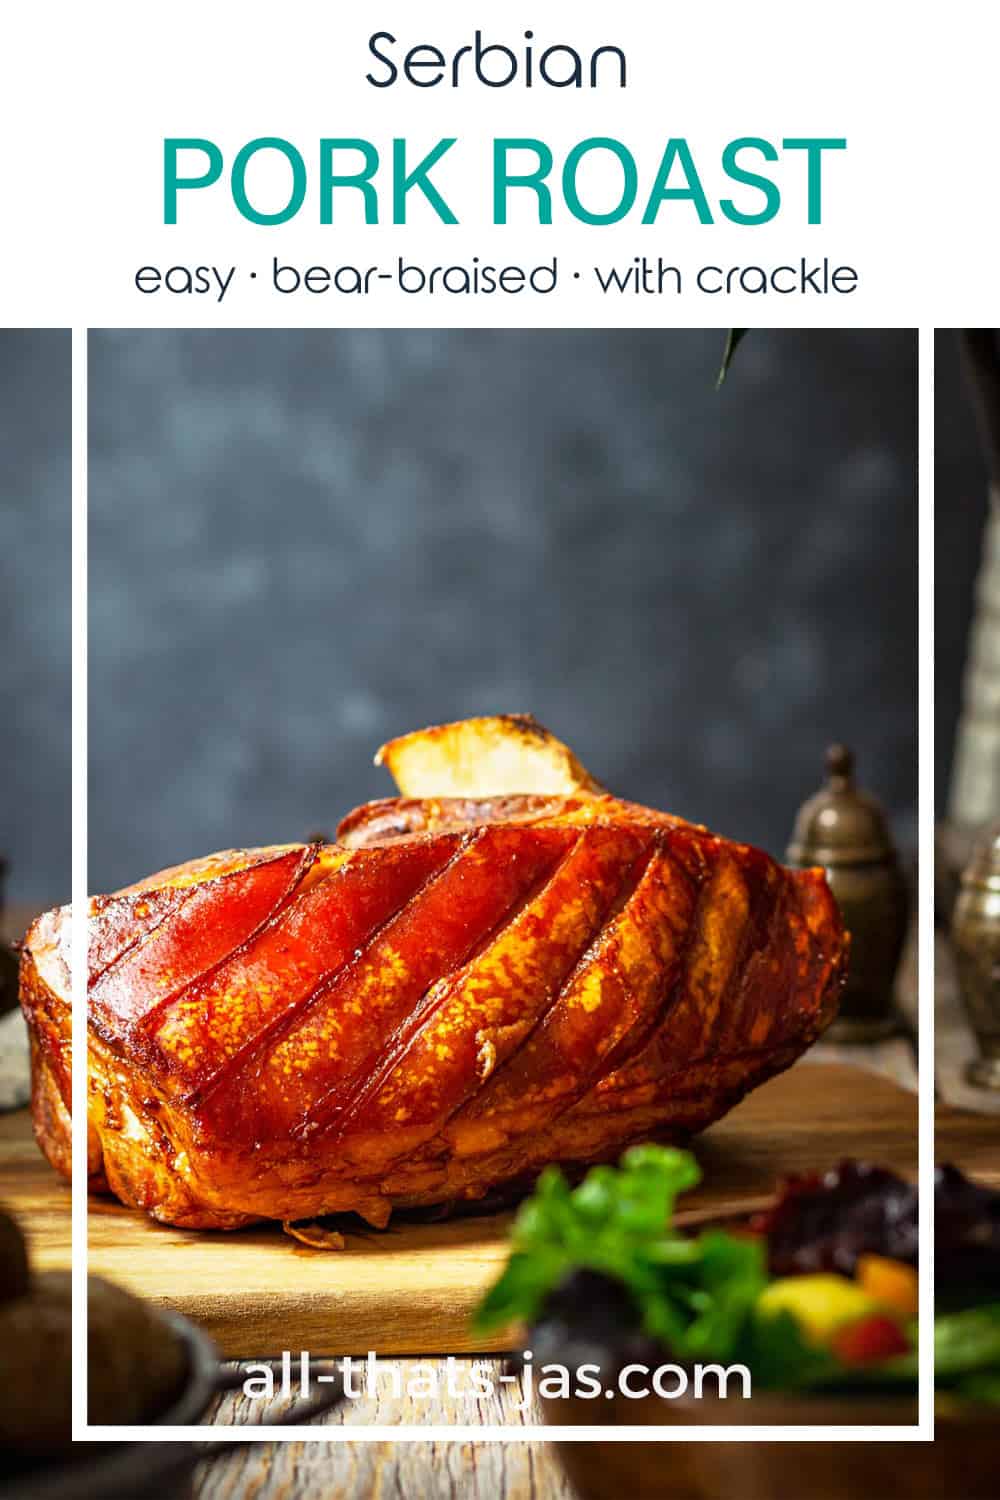 A close up of the crispy skin, crackle, of the pork roast with text overlay.